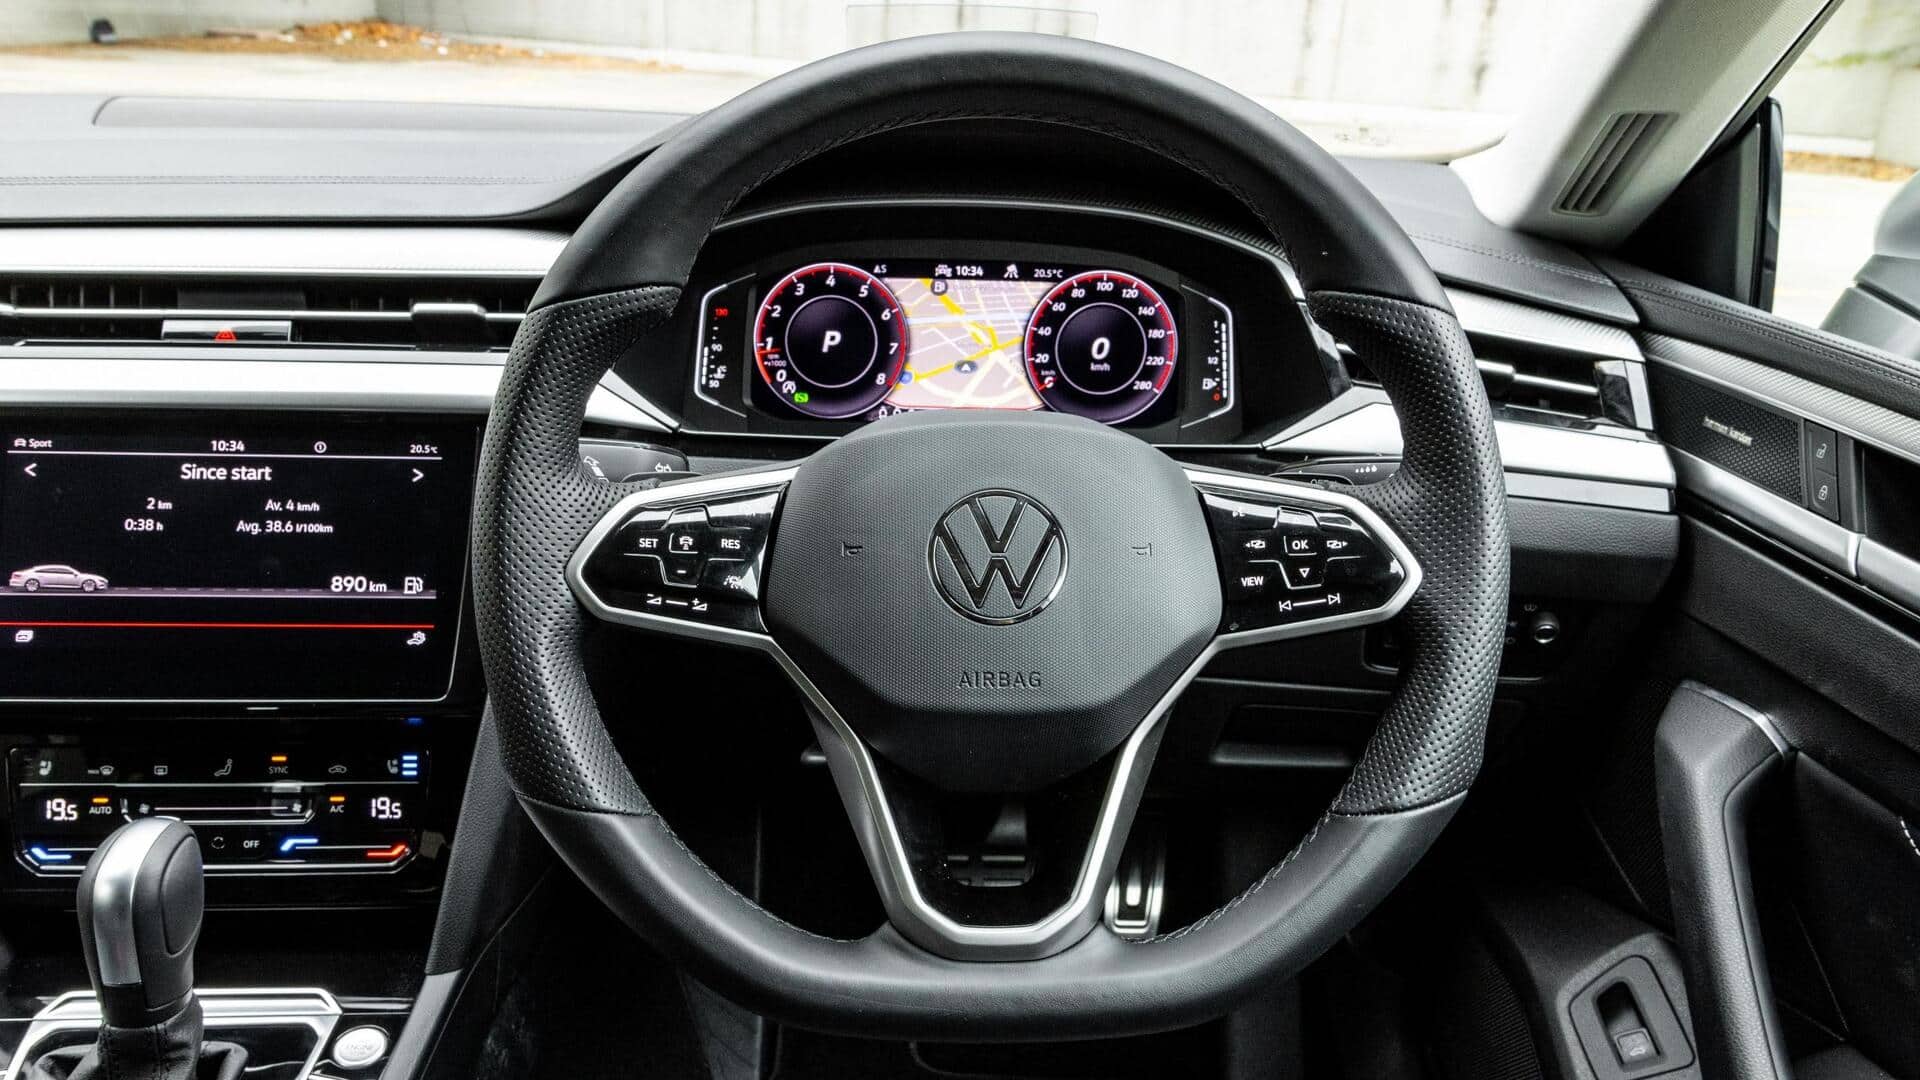 Volkswagen patents new steering wheel technology with integrated buttons